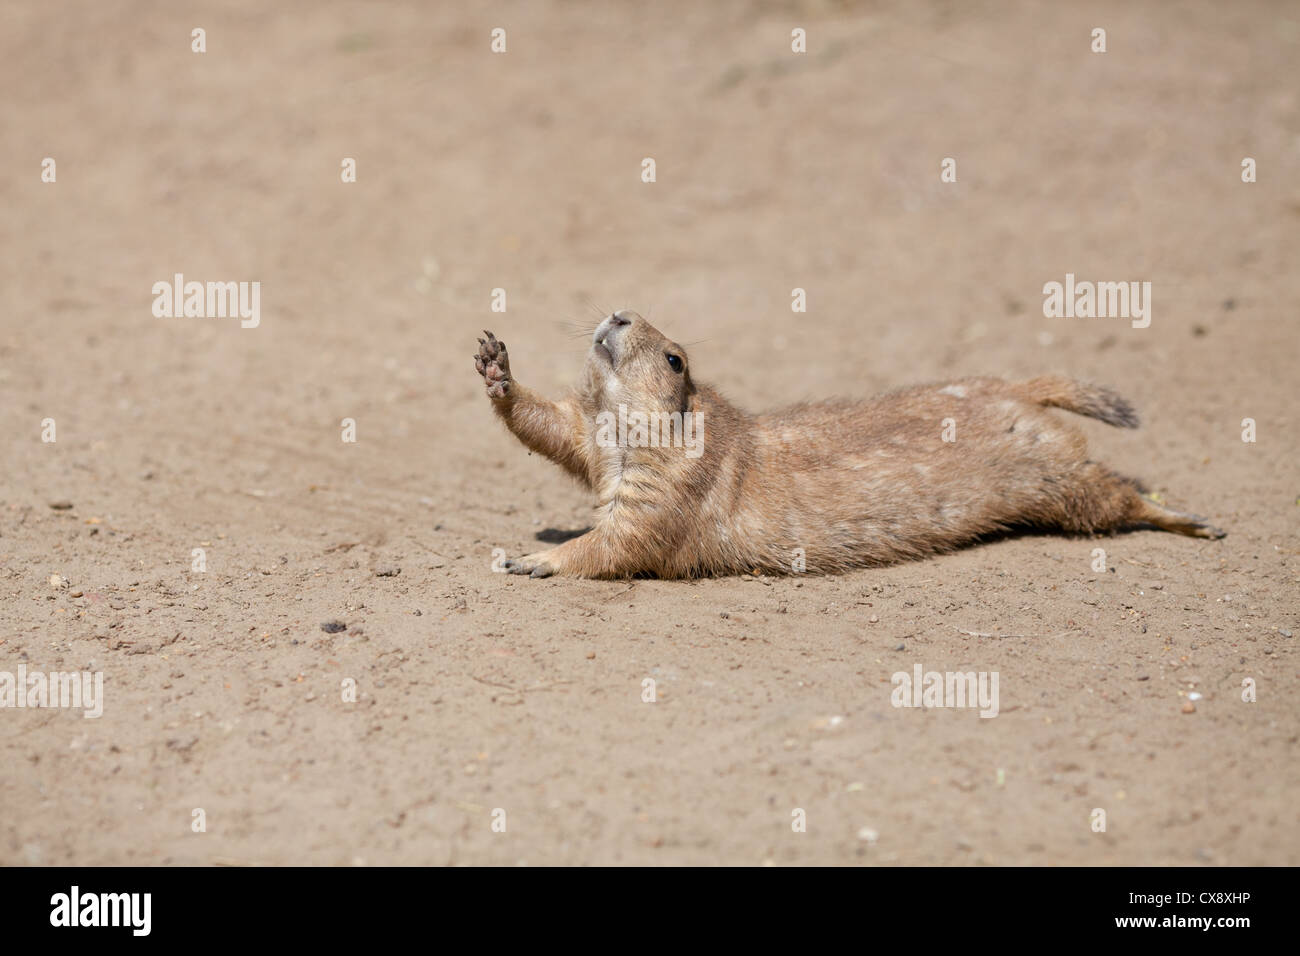 Funny rodent rising his paw up like it is asking to drink water Stock Photo